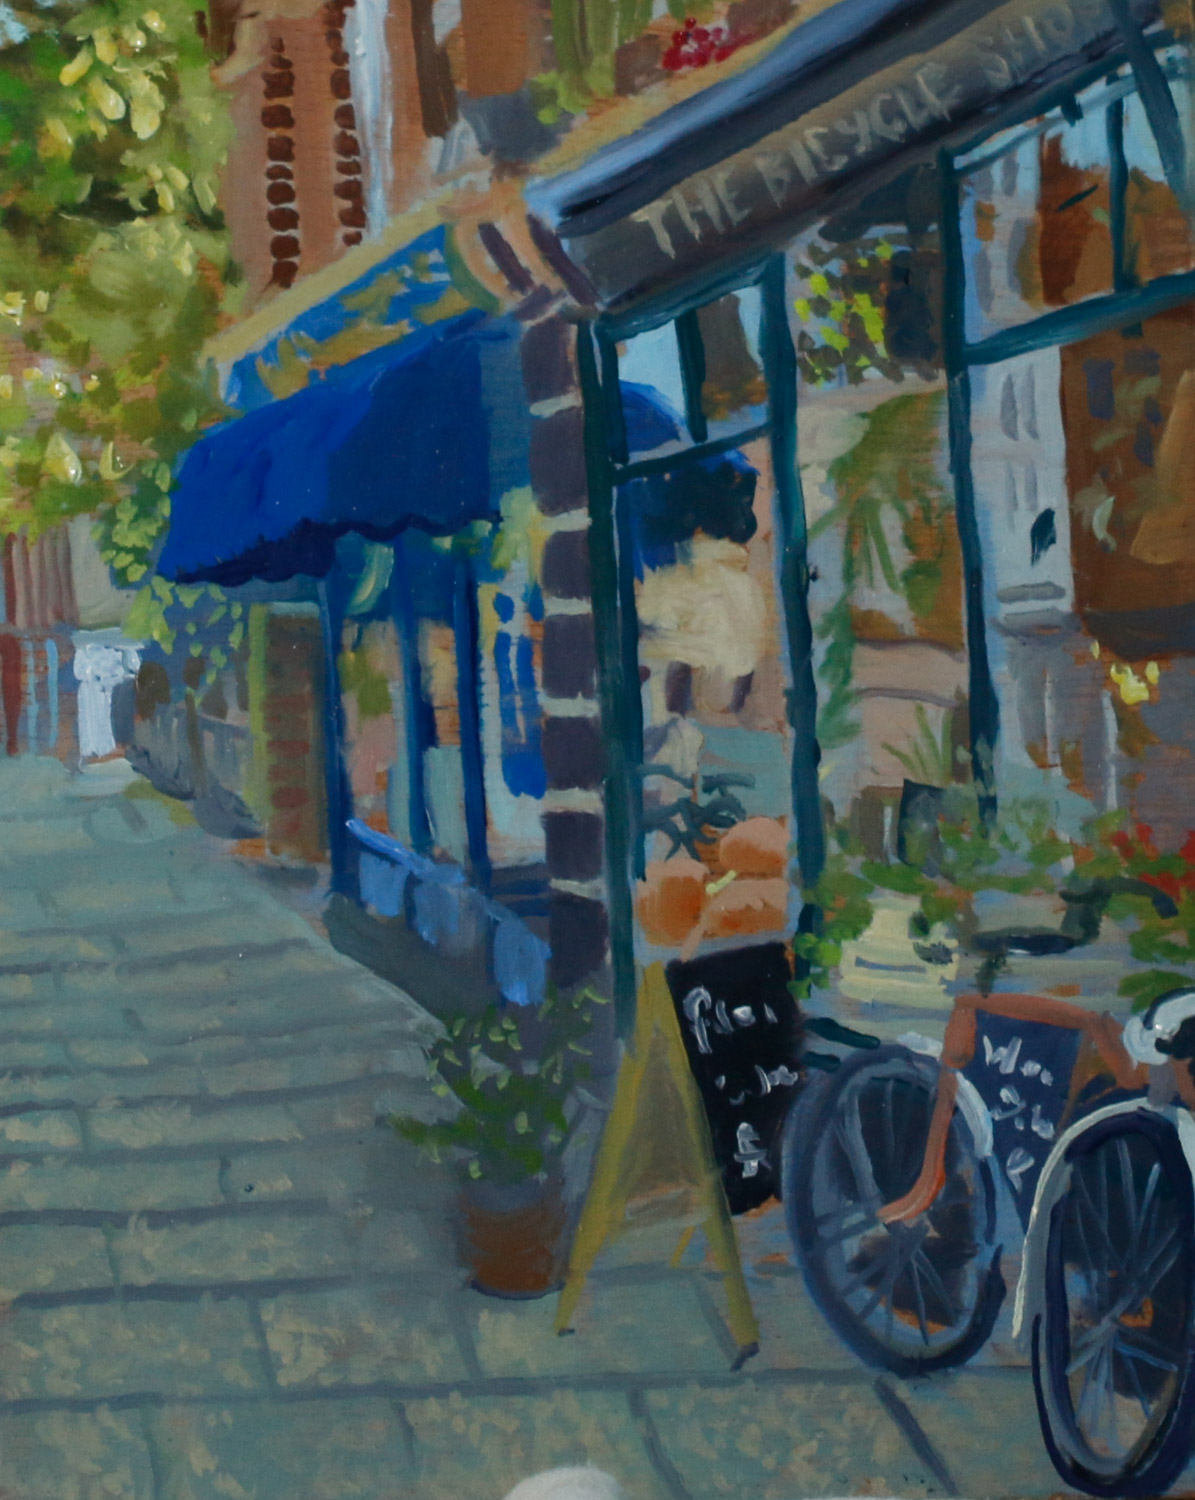 Artist Susan Mann - The Bicycle Way, £360 7x9 Studio Prepared Oil on Board at Paint Out Norwich 2015